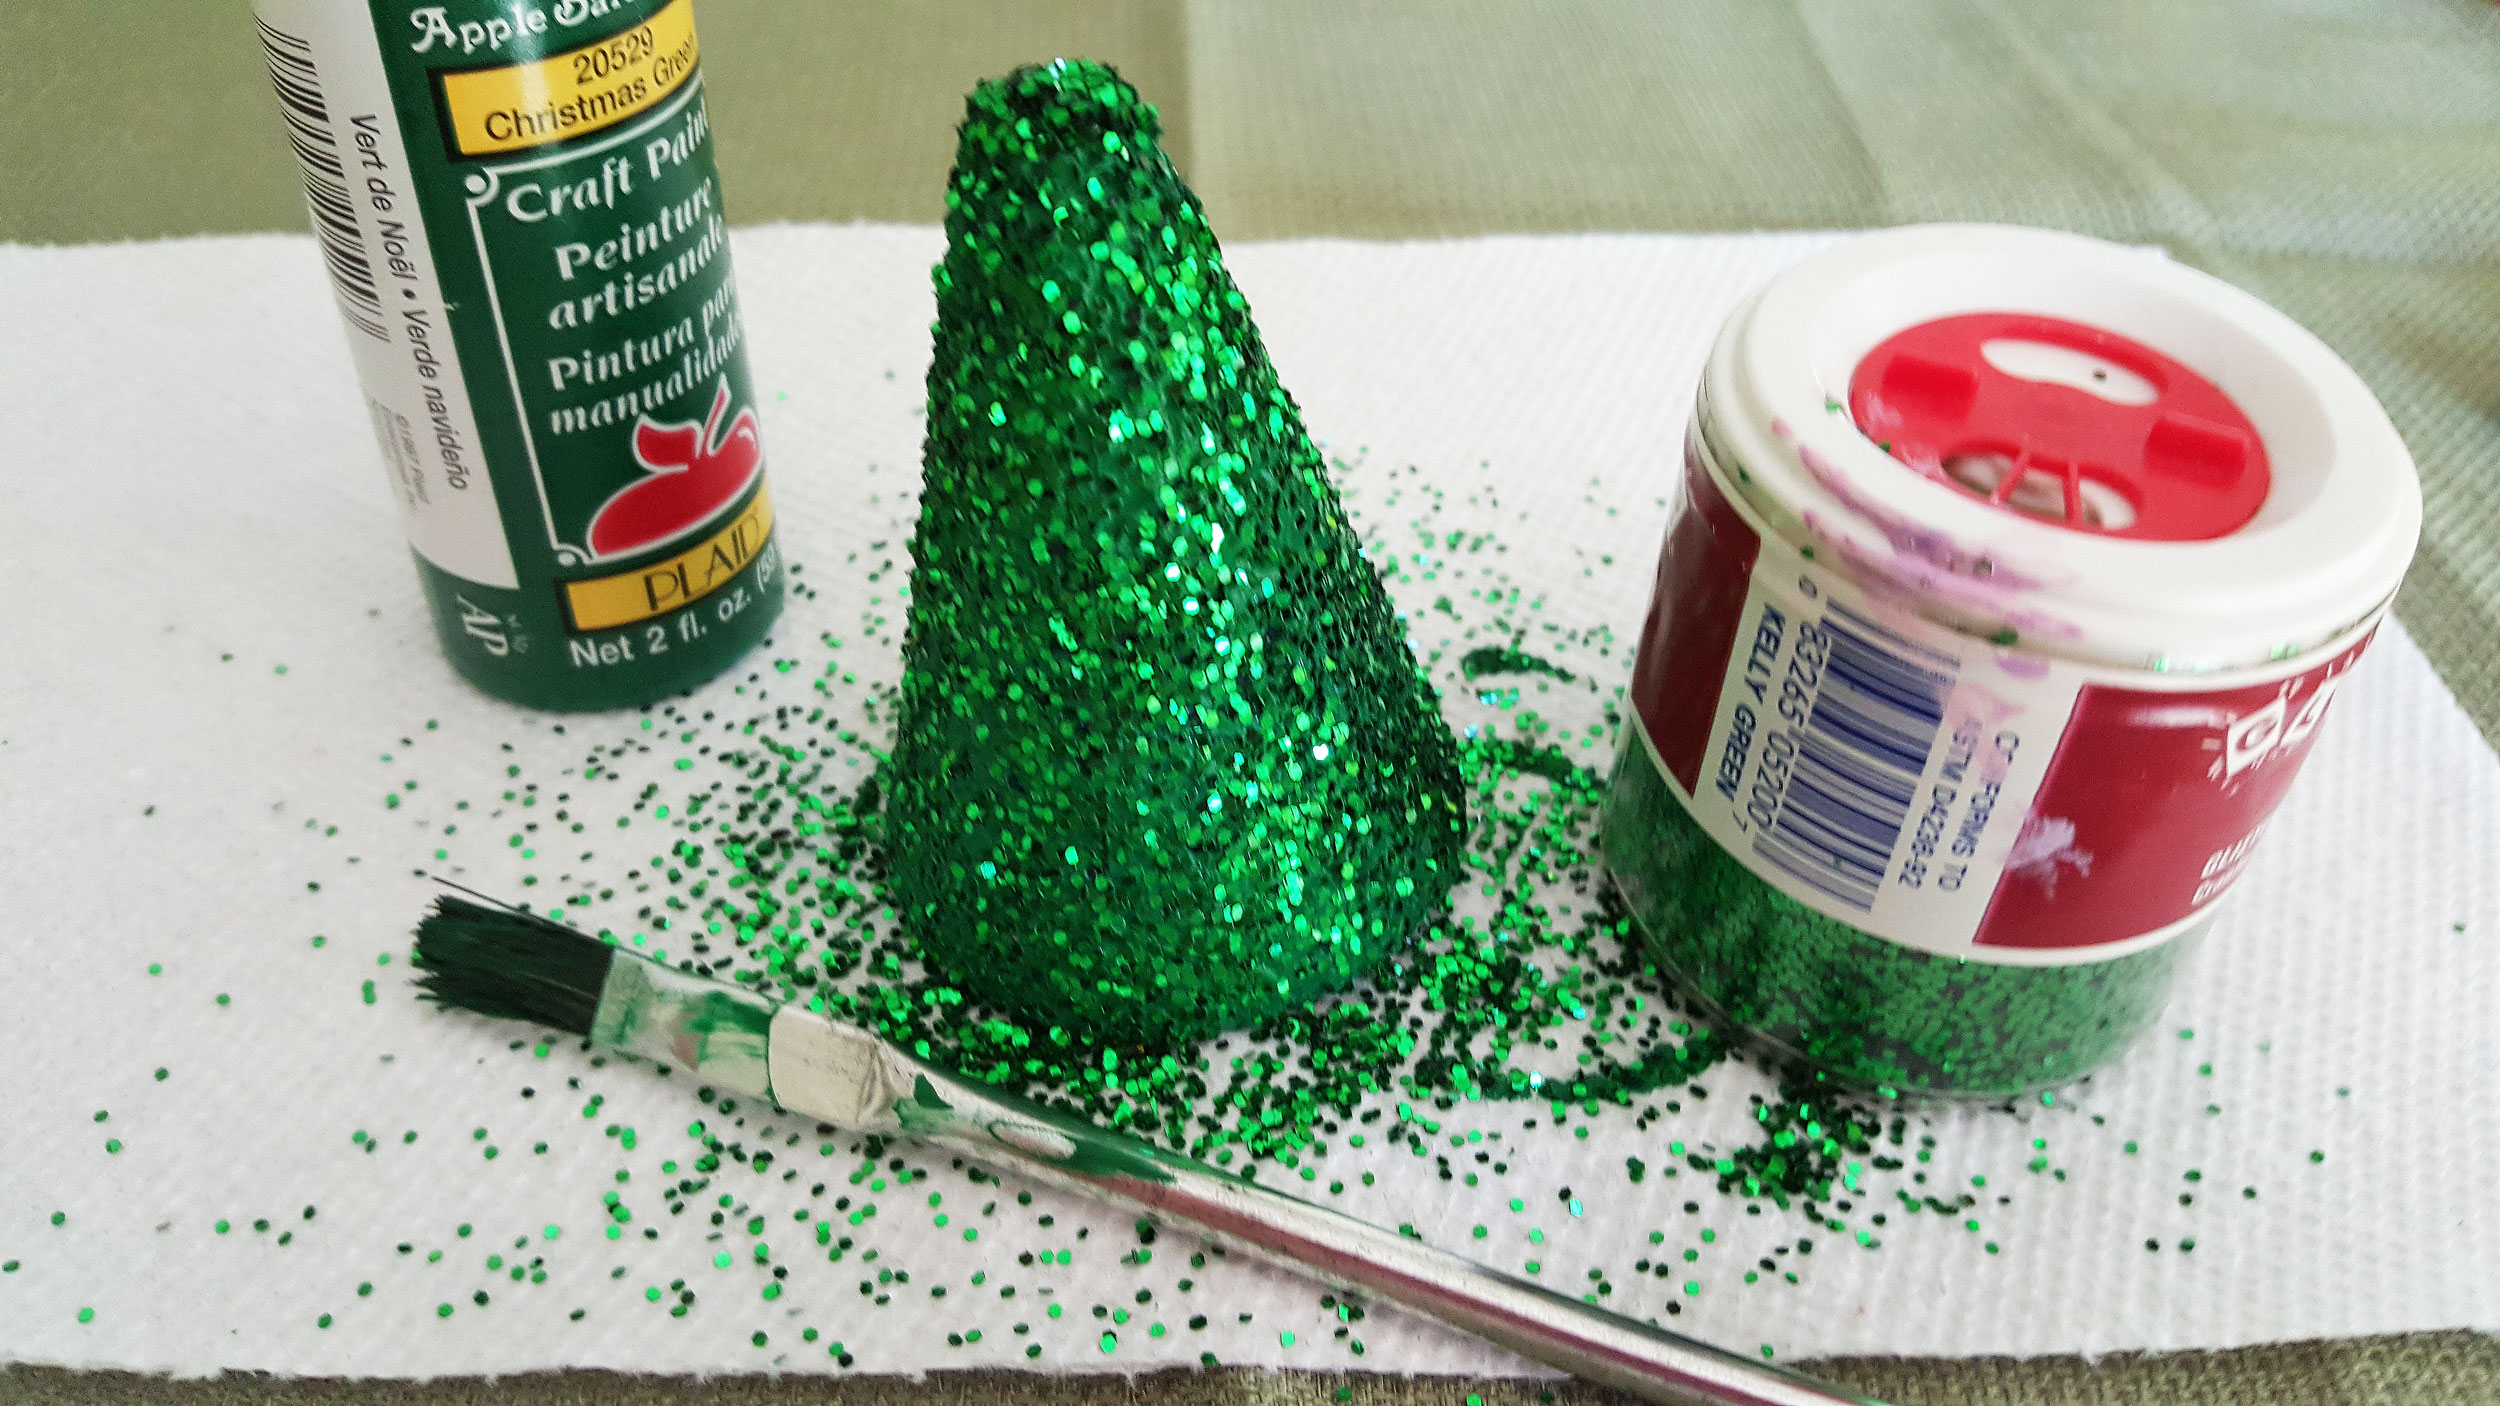 Step 1 to make the miniature Christmas tree craft for kids is to paint the Styrofoam cone with green paint and shake green glitter over it. | OrnamentShop.com